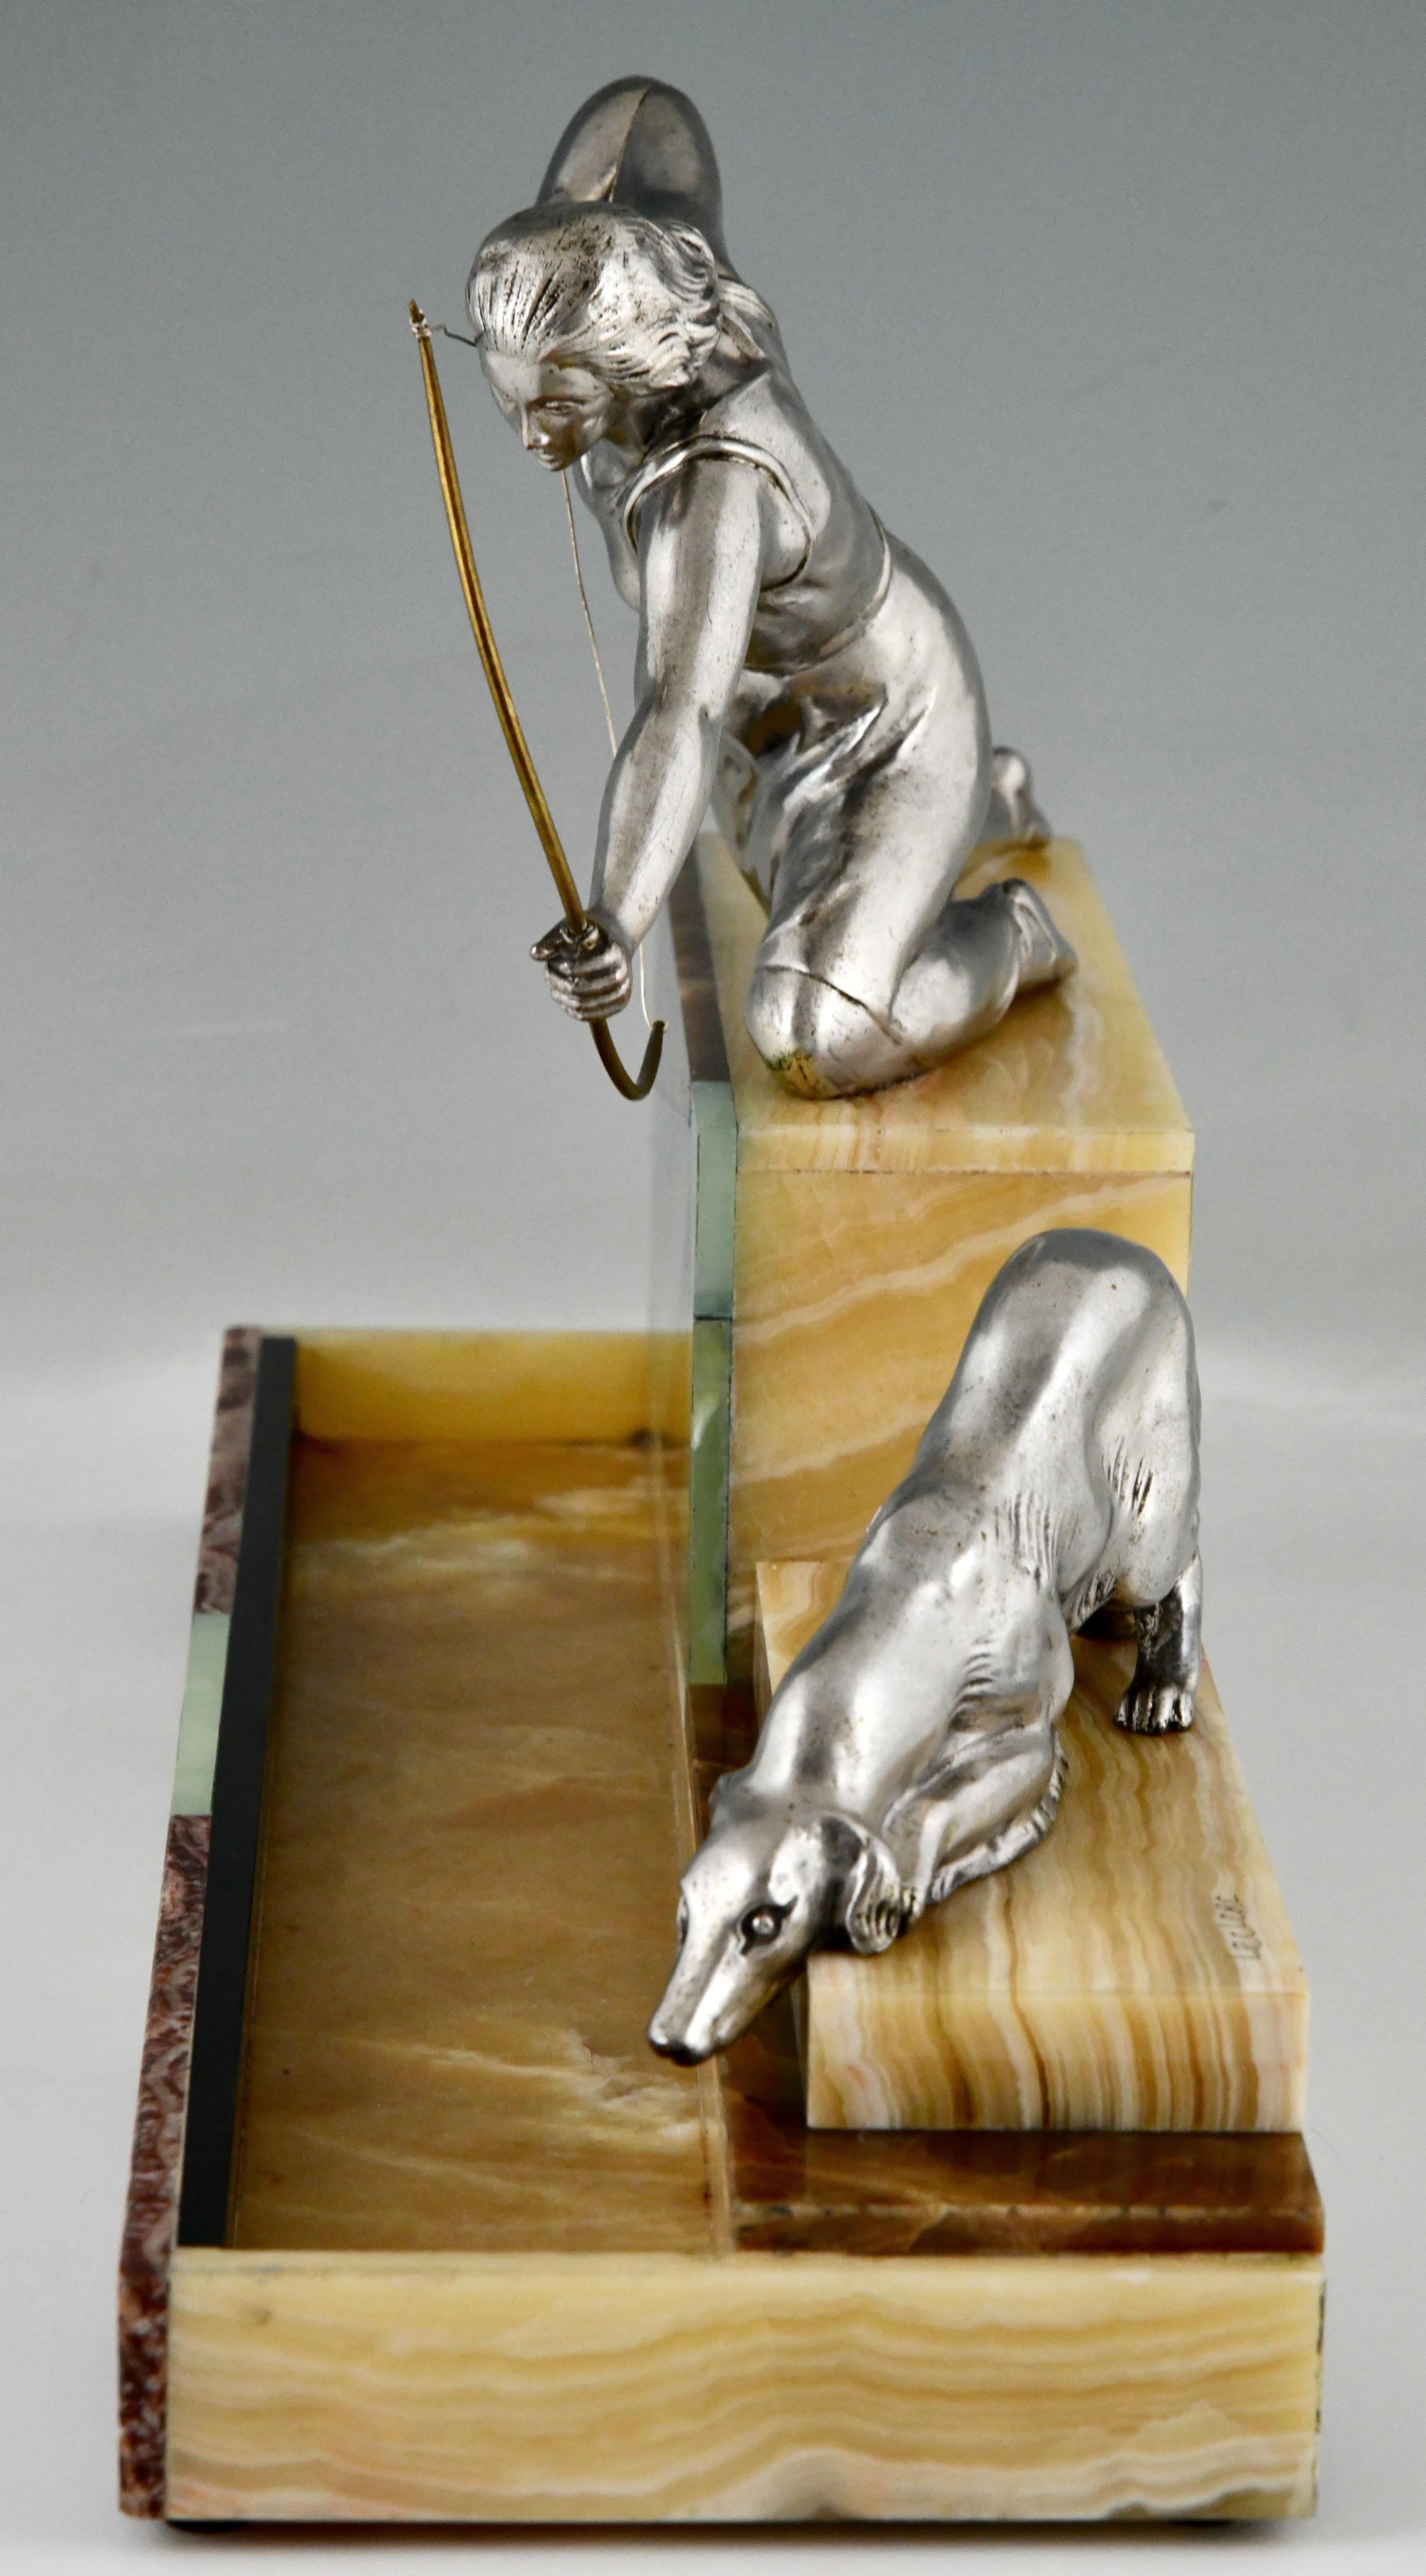 Metal Art Deco sculptural tray Diana the huntress by Leclerc, France 1930